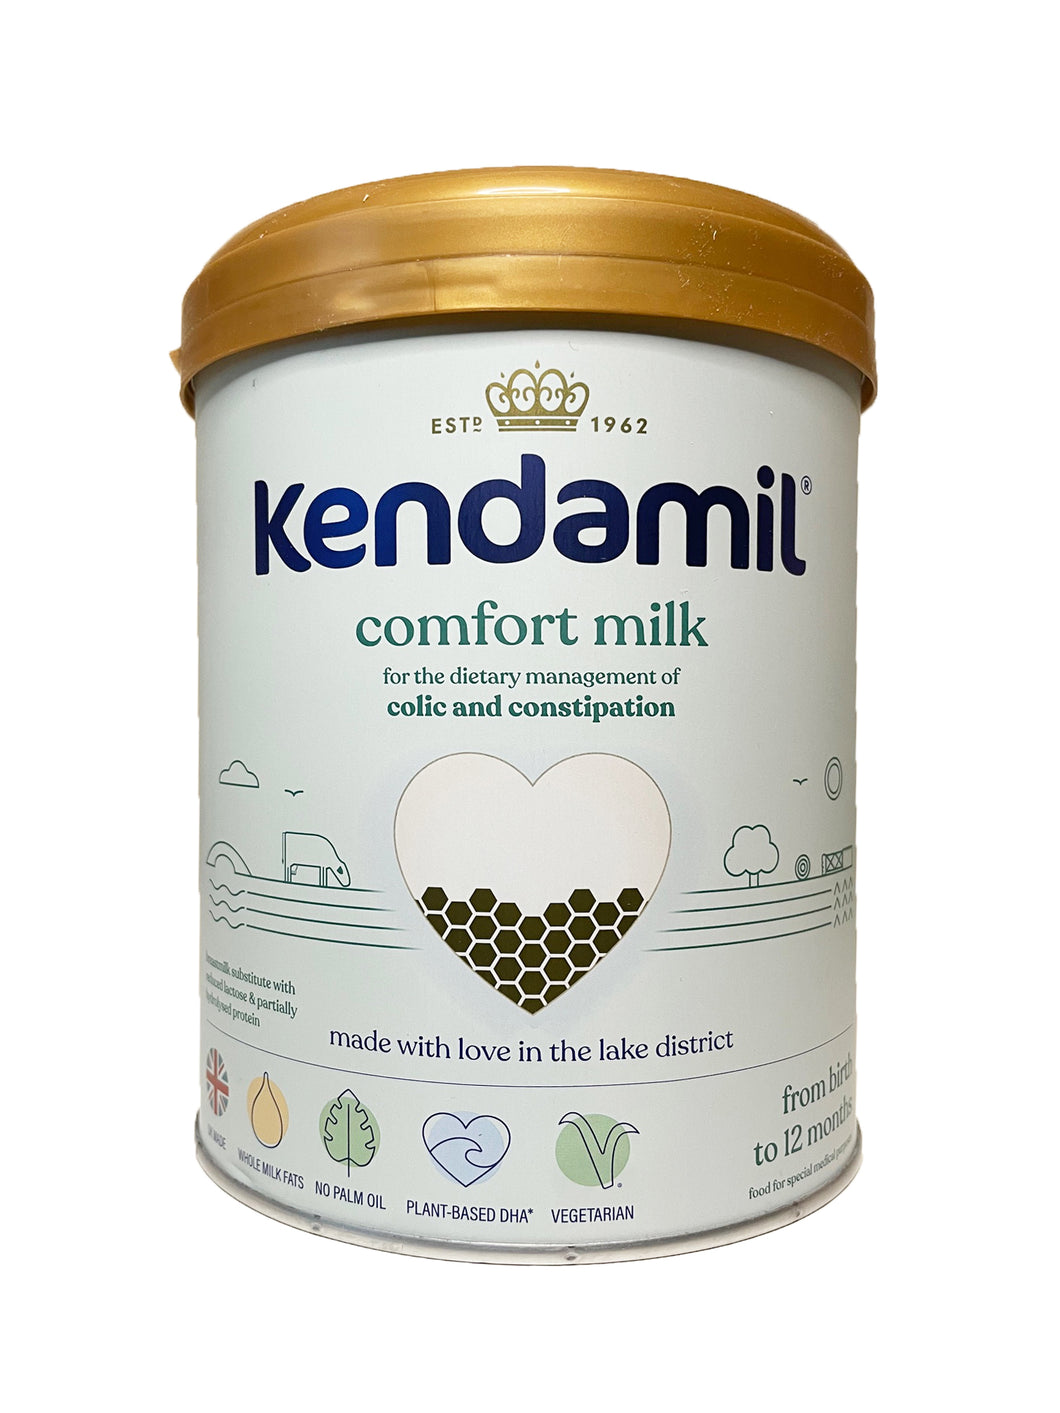 Kendamil Comfort - Colic and Constipation Baby Formula